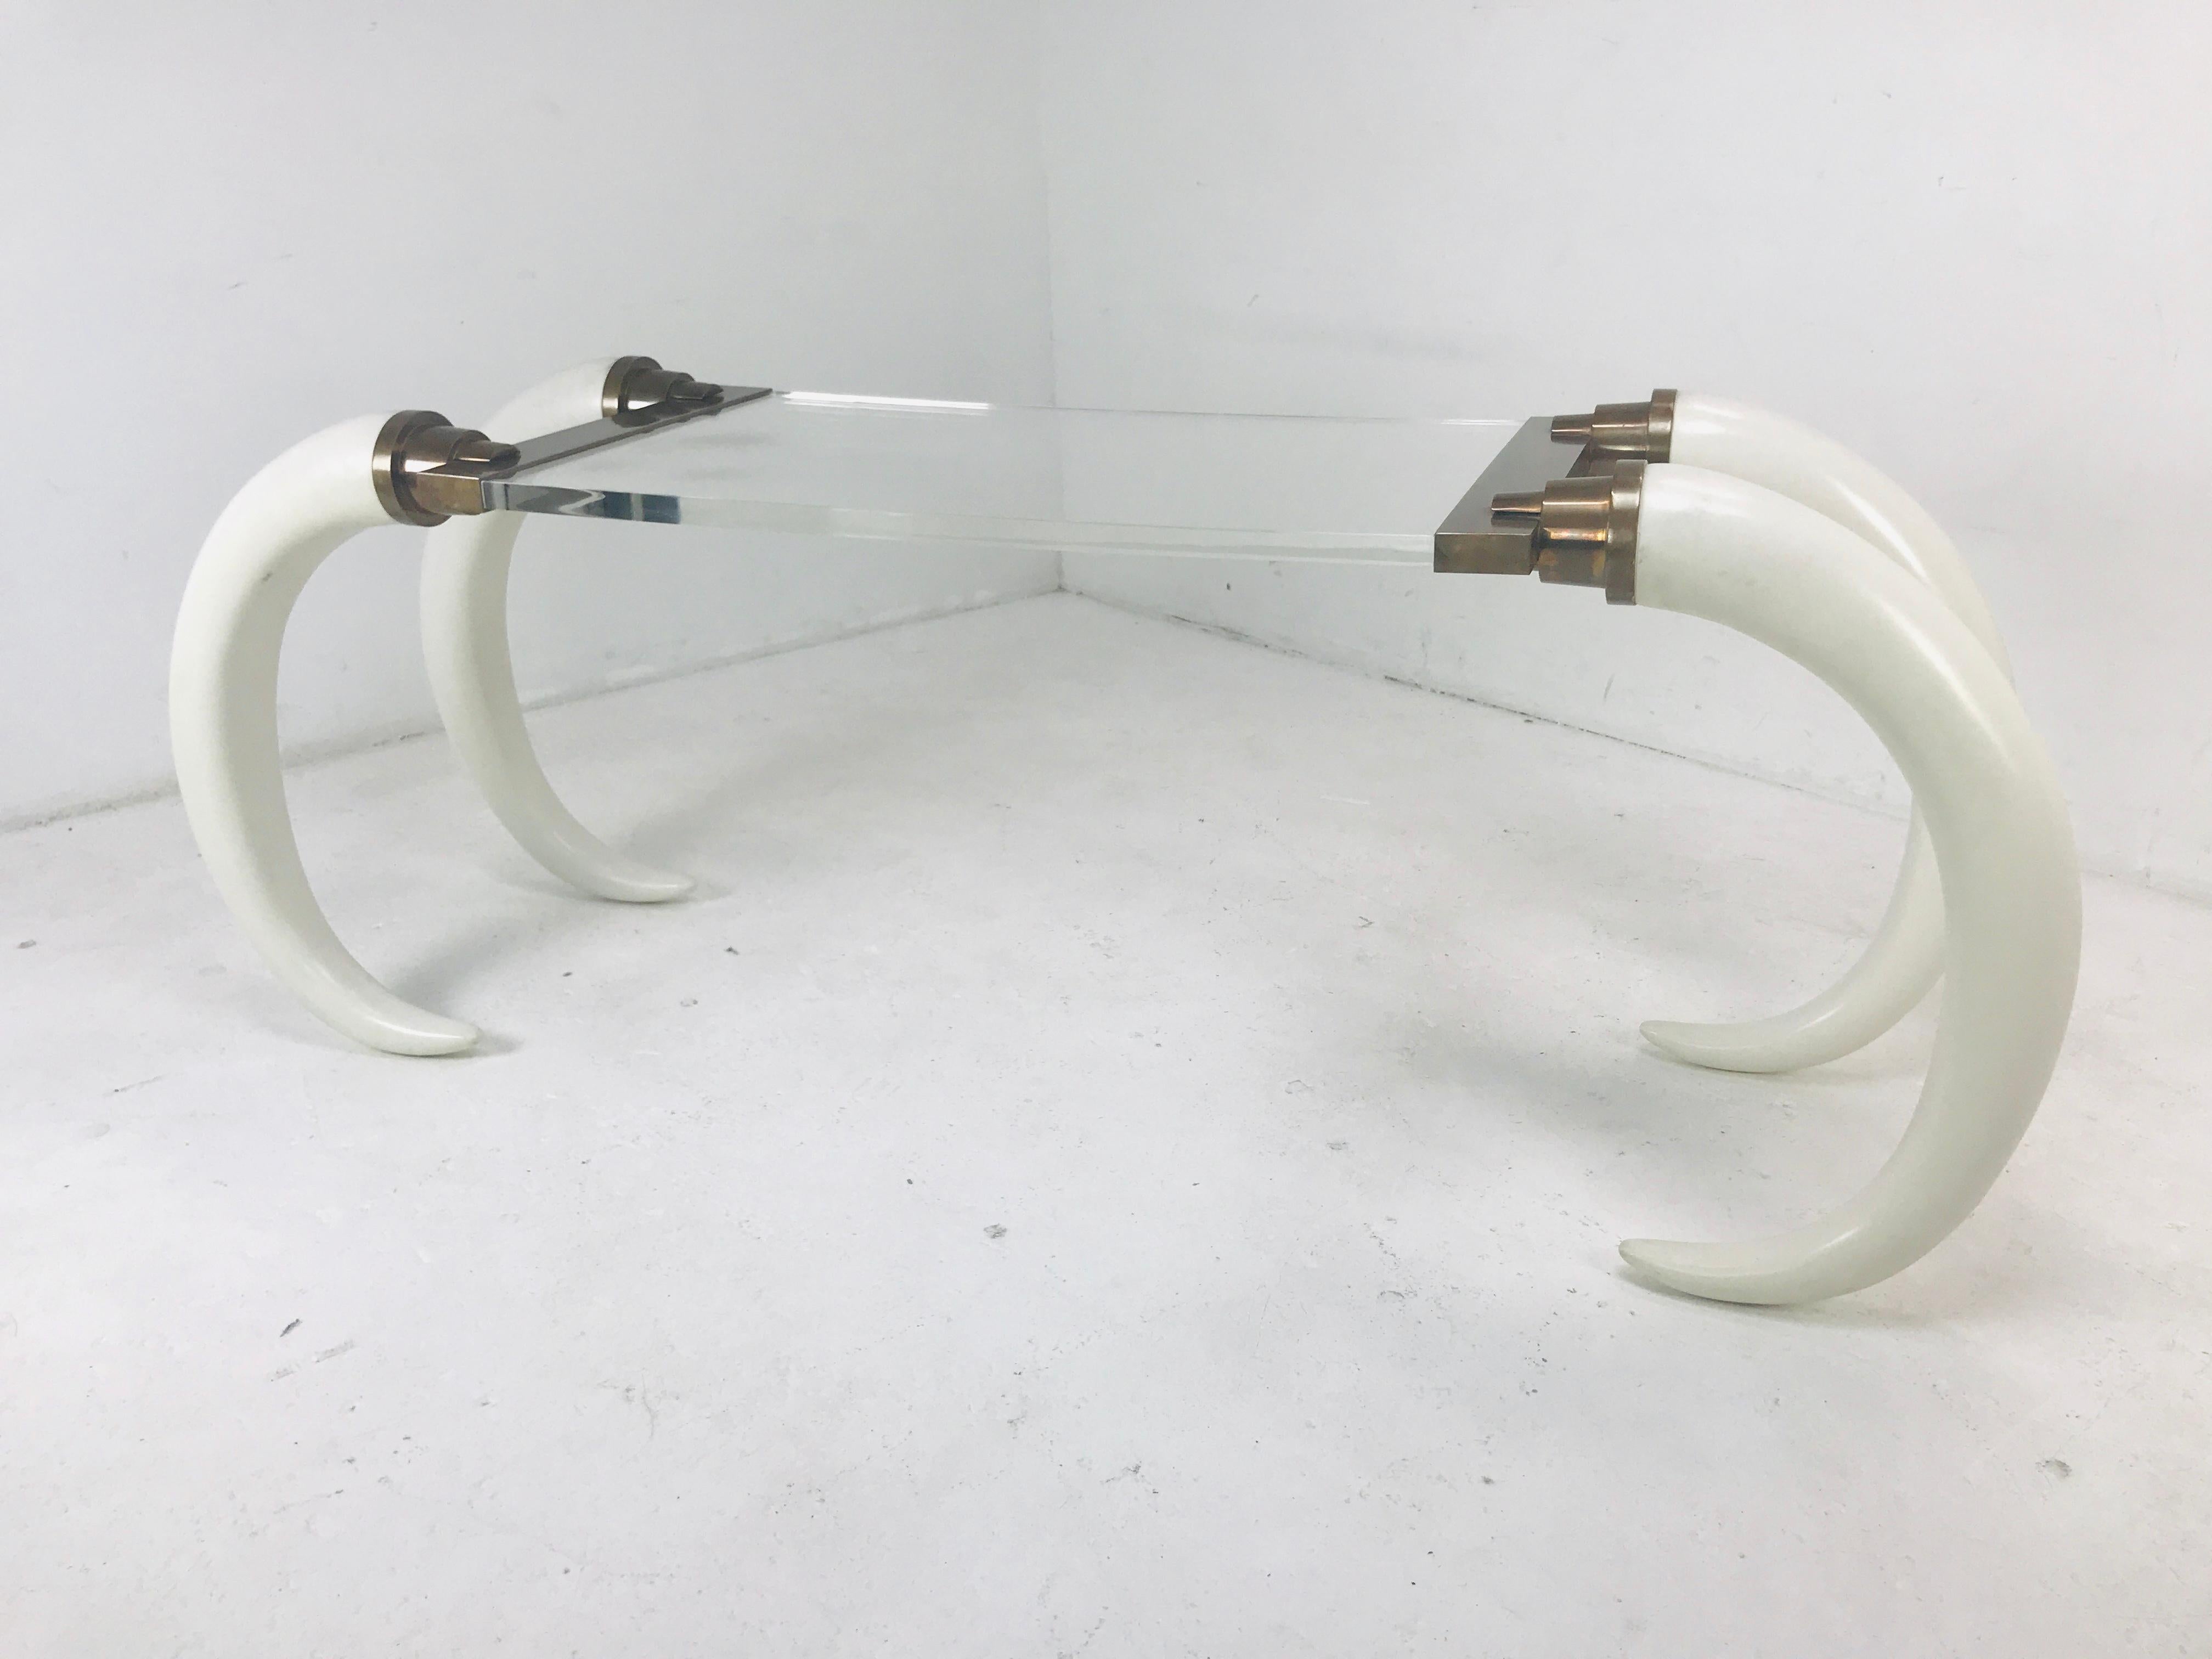 1970s elephant tusk console with Lucite top by Suzanne Dahl & Jeremy Barich. Designed for the Versailles collection. Finished with brass along both sides.